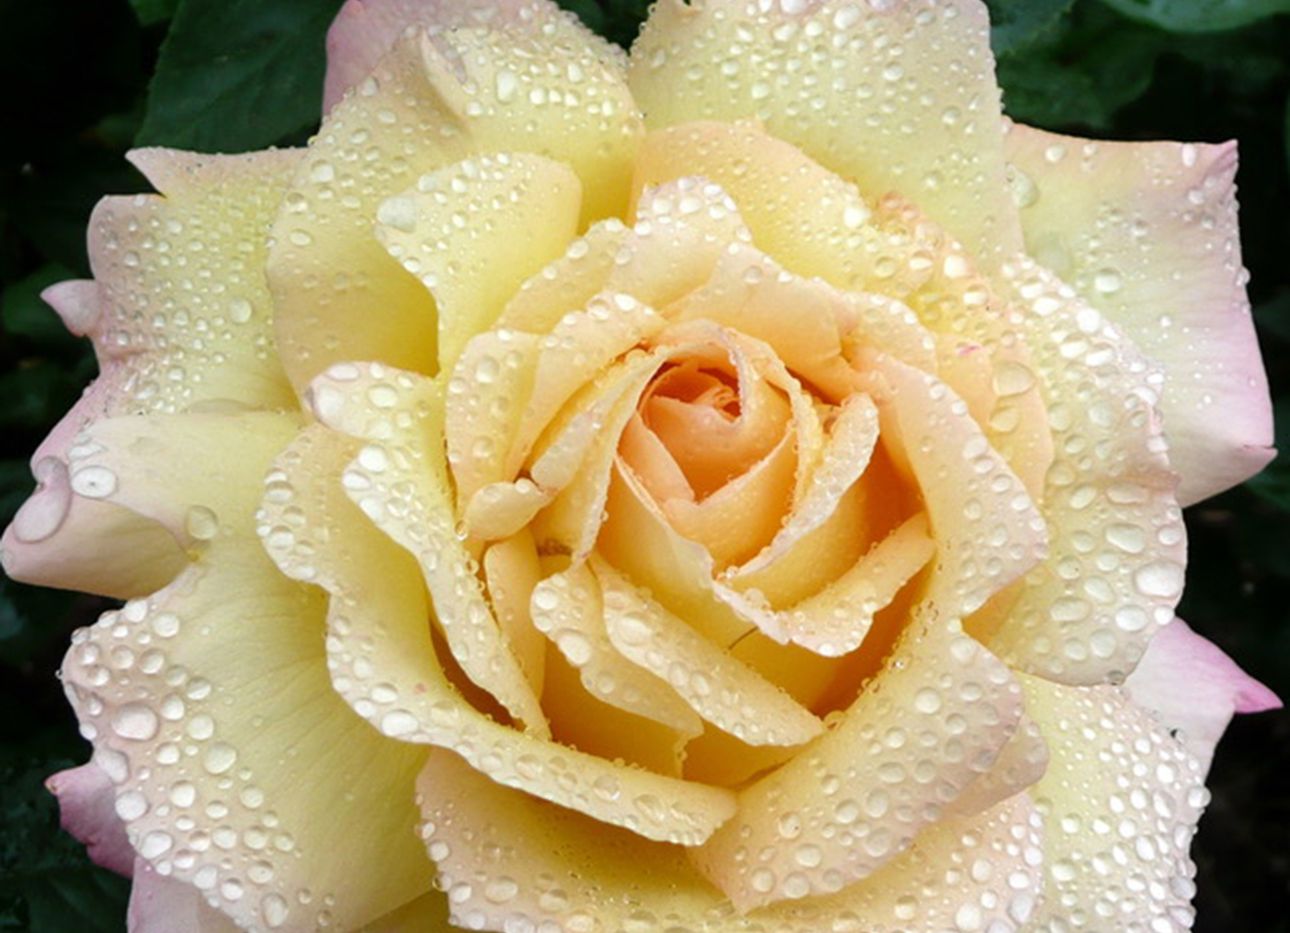 A dew-covered white and pink rose.